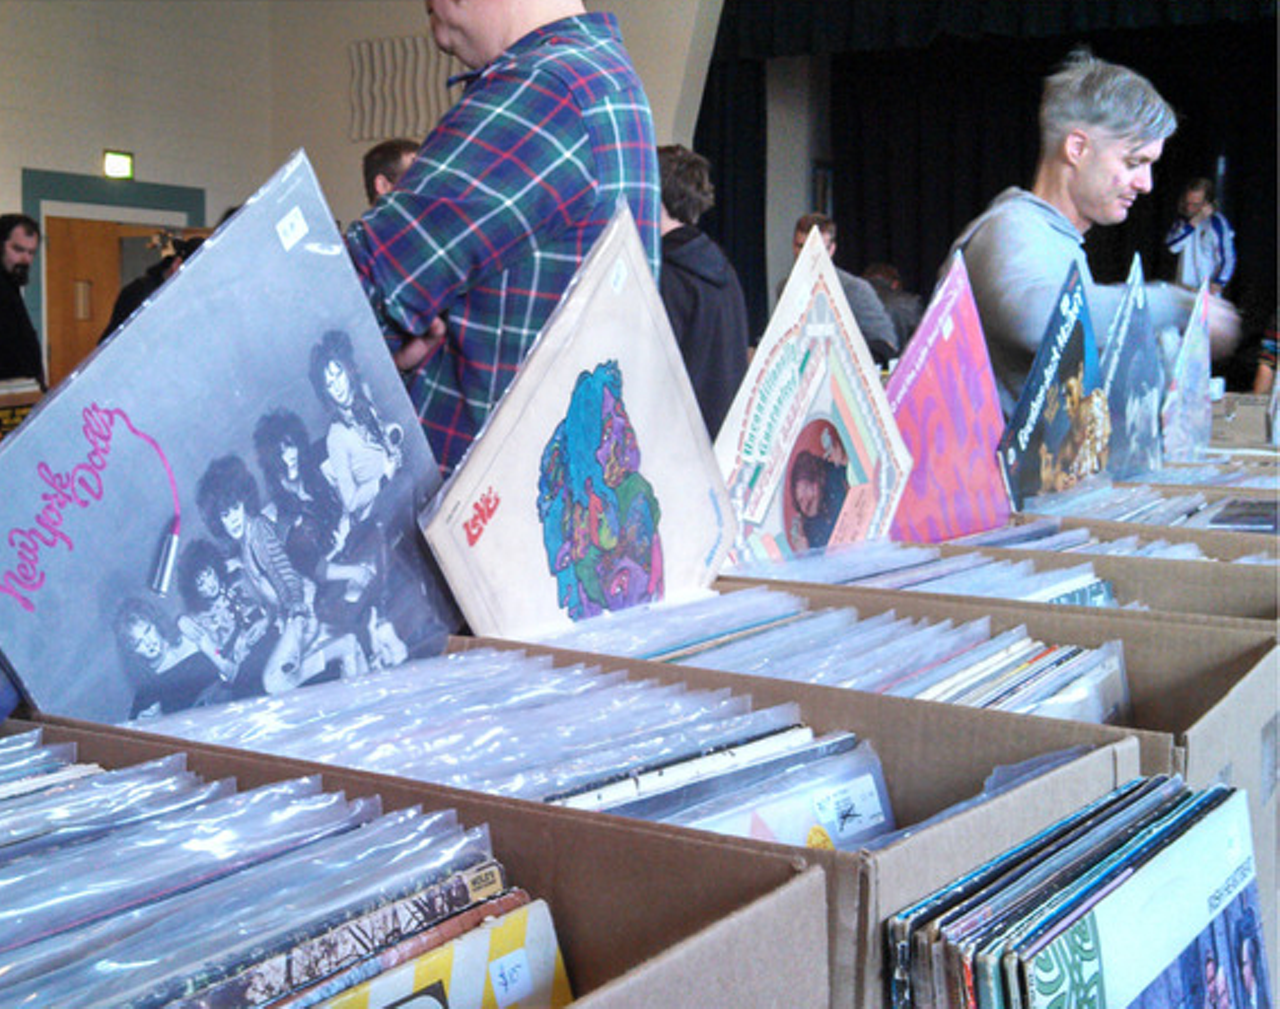 Northside Record Fair
When: March 30 at 11 a.m.
Where: Heart In Balance Event Center, Northside
What: Record fair featuring vinyl collectors and retailers.
Who: Shake It Records and Feel It Records
Why: There's going to be more records than you can thumb through. Vendors also feature merchandise and memorabilia.